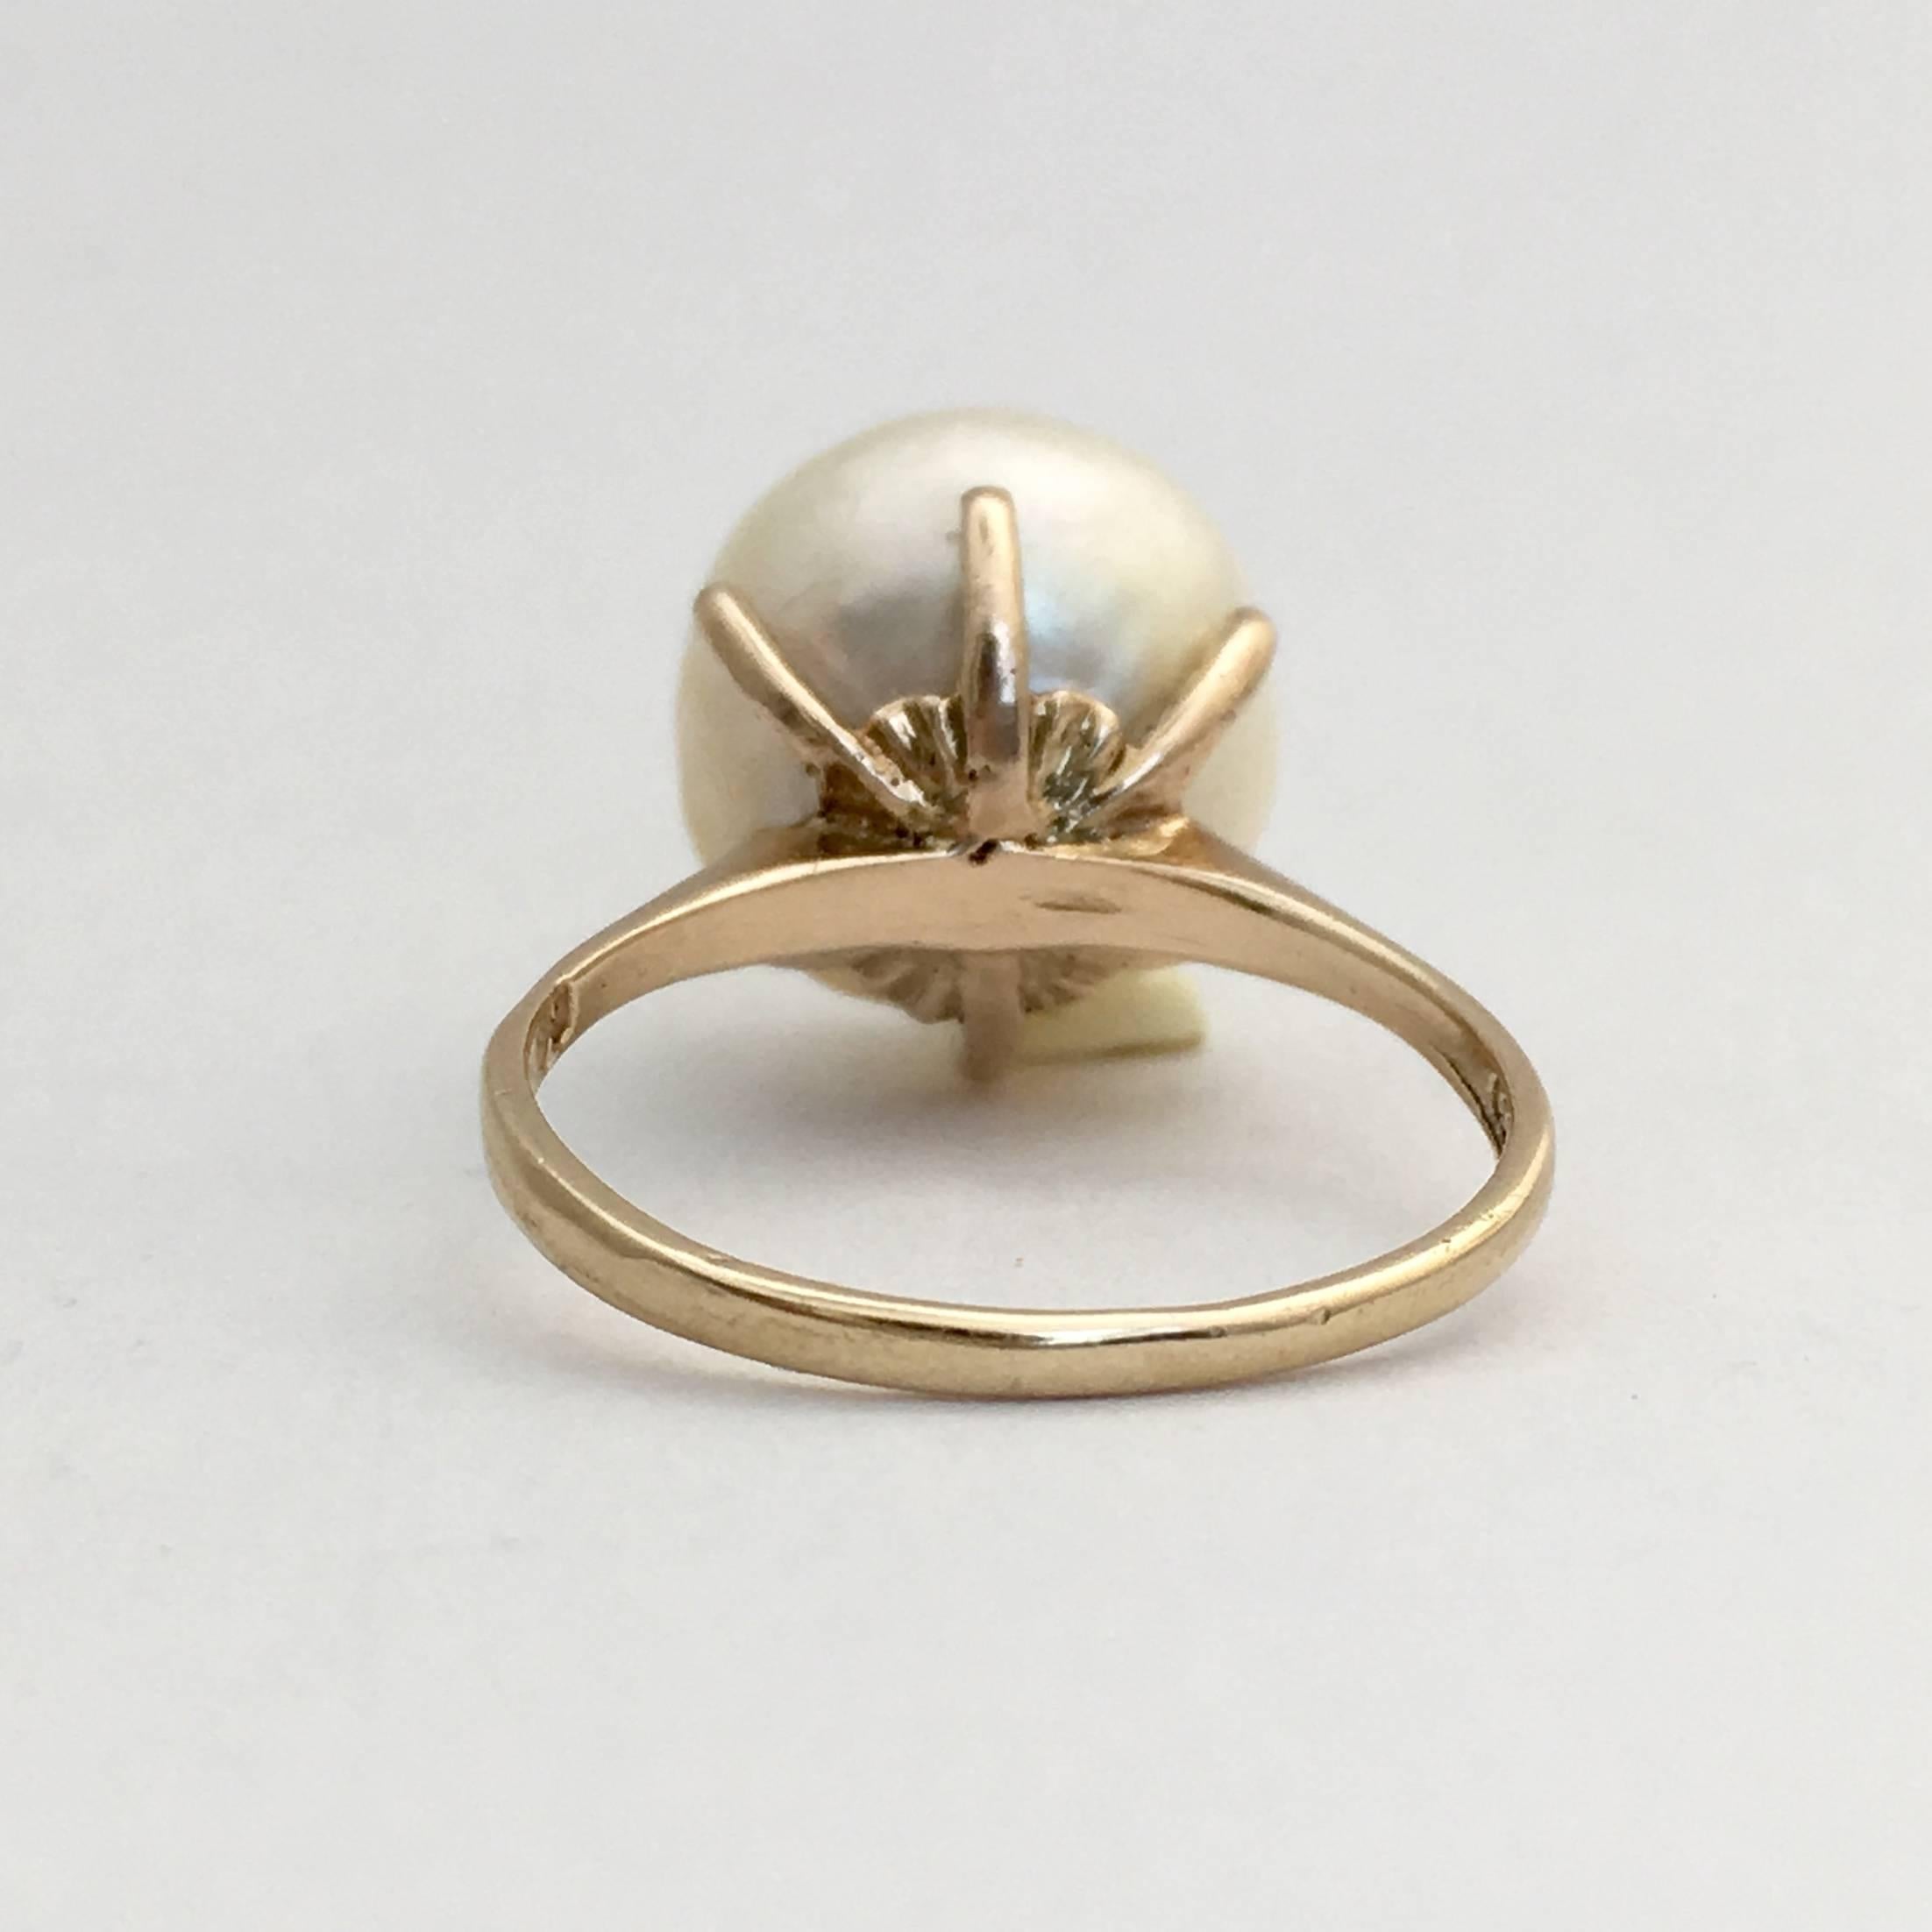 Women's or Men's 1950s Cocktail Ring Large Baroque Pearl English Midcentury Gold Vintage Jewelry For Sale